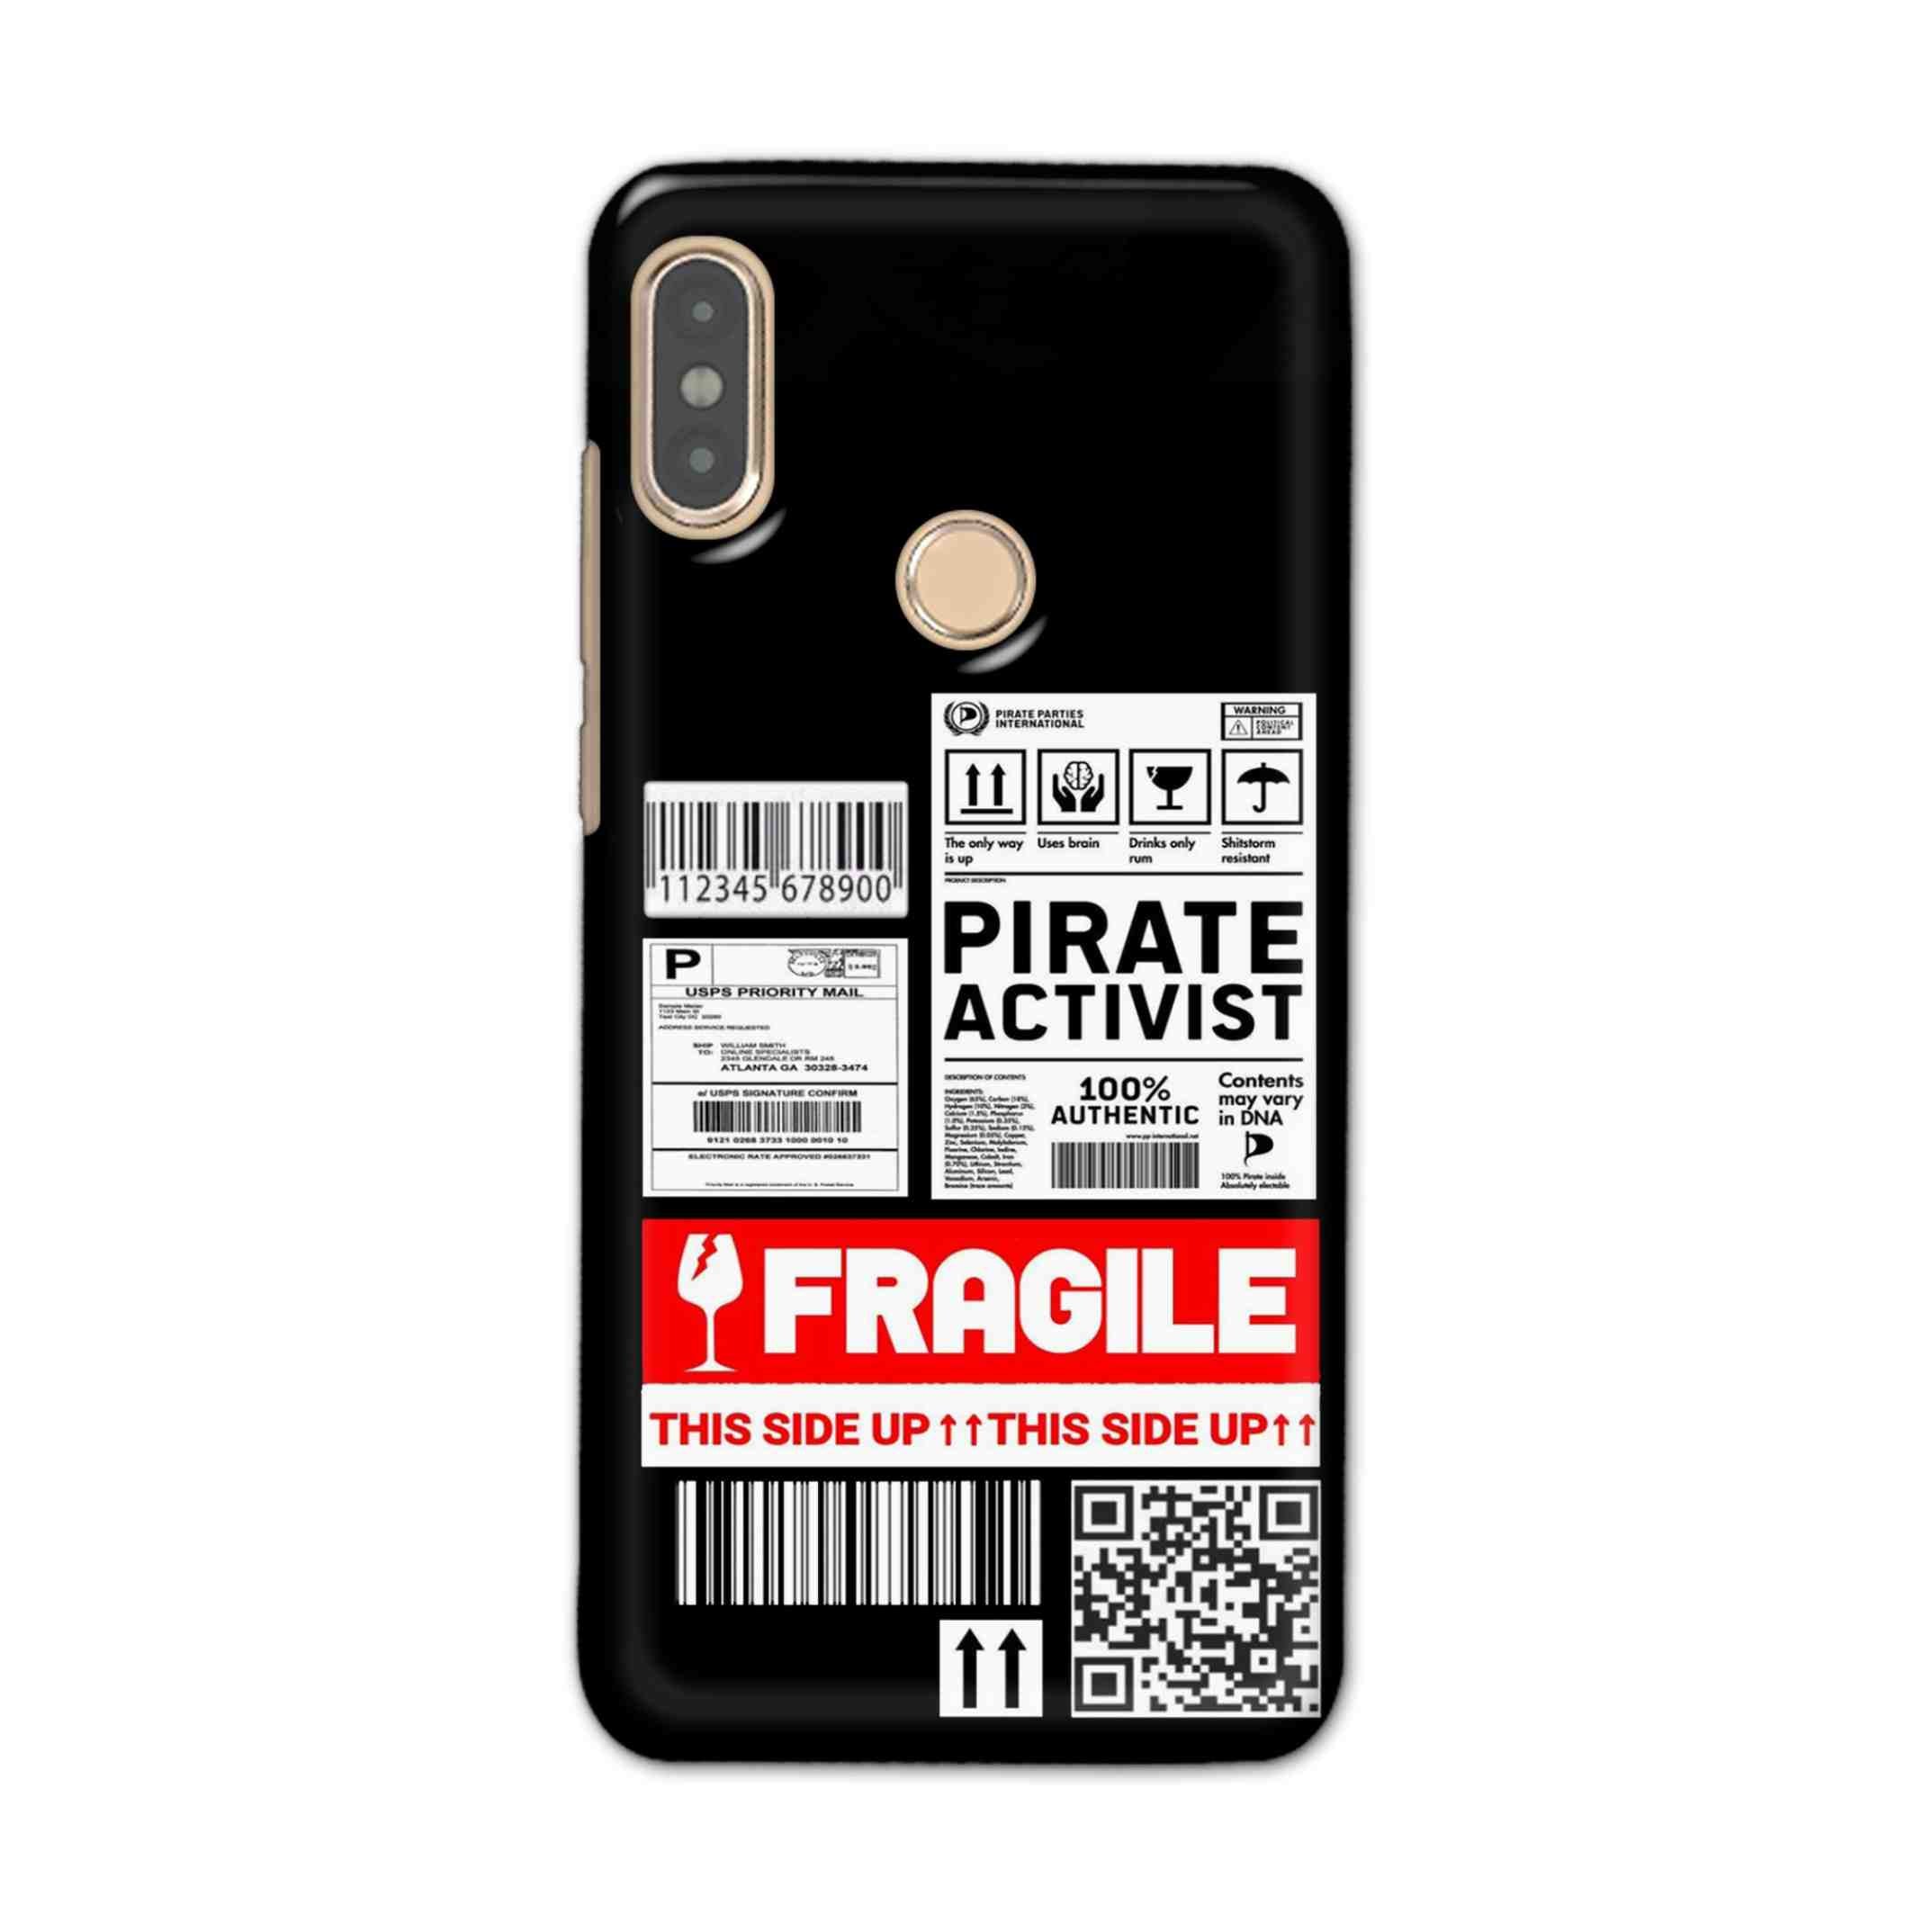 Buy Fragile Hard Back Mobile Phone Case Cover For Xiaomi Redmi Note 5 Pro Online